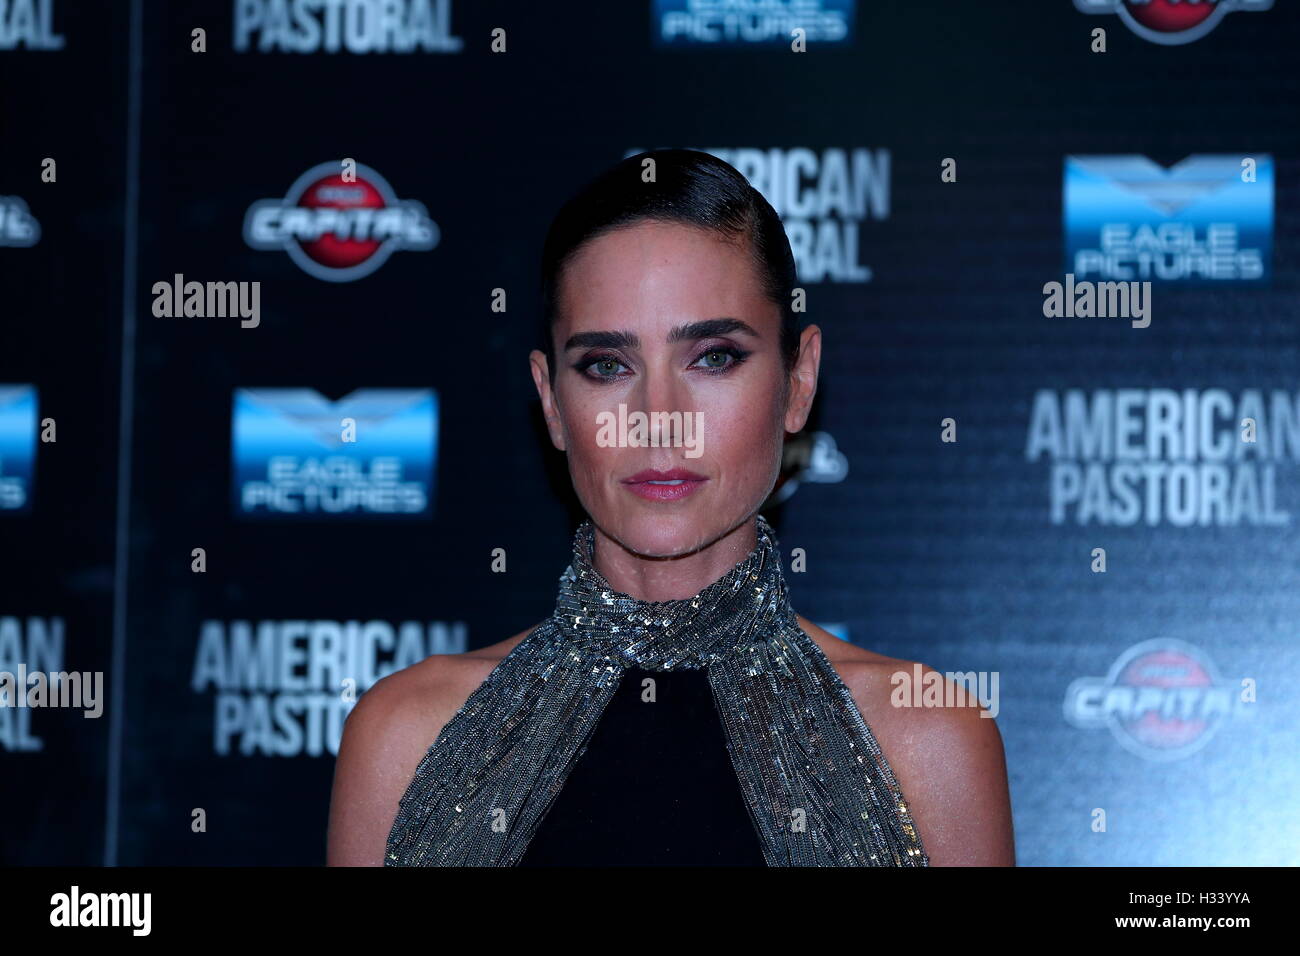 Roma, Italy. 03rd Oct, 2016. Jennifer Connelly during Premiere in Cinema Barberini of film "American Pastoral" in Italy. © Matteo Nardone/Pacific Press/Alamy Live News Stock Photo